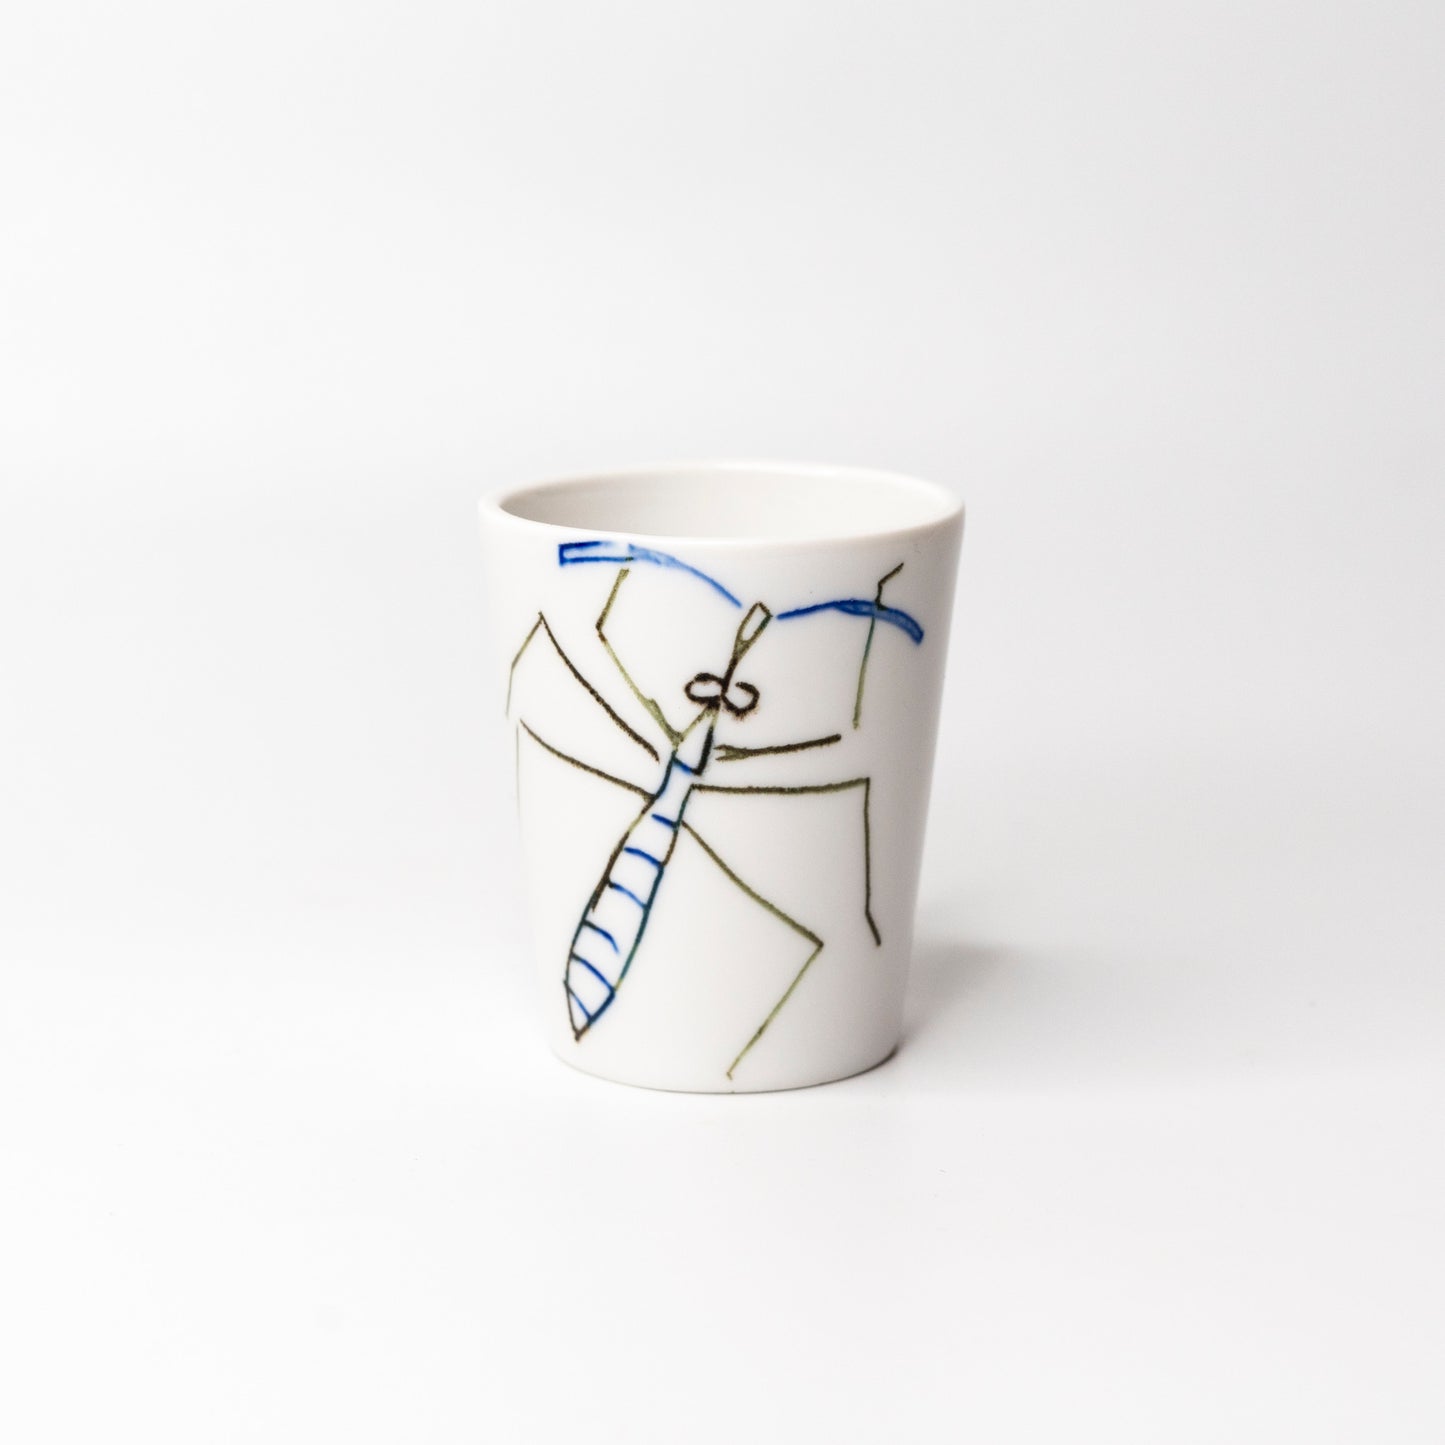 Porcelain insect teacup